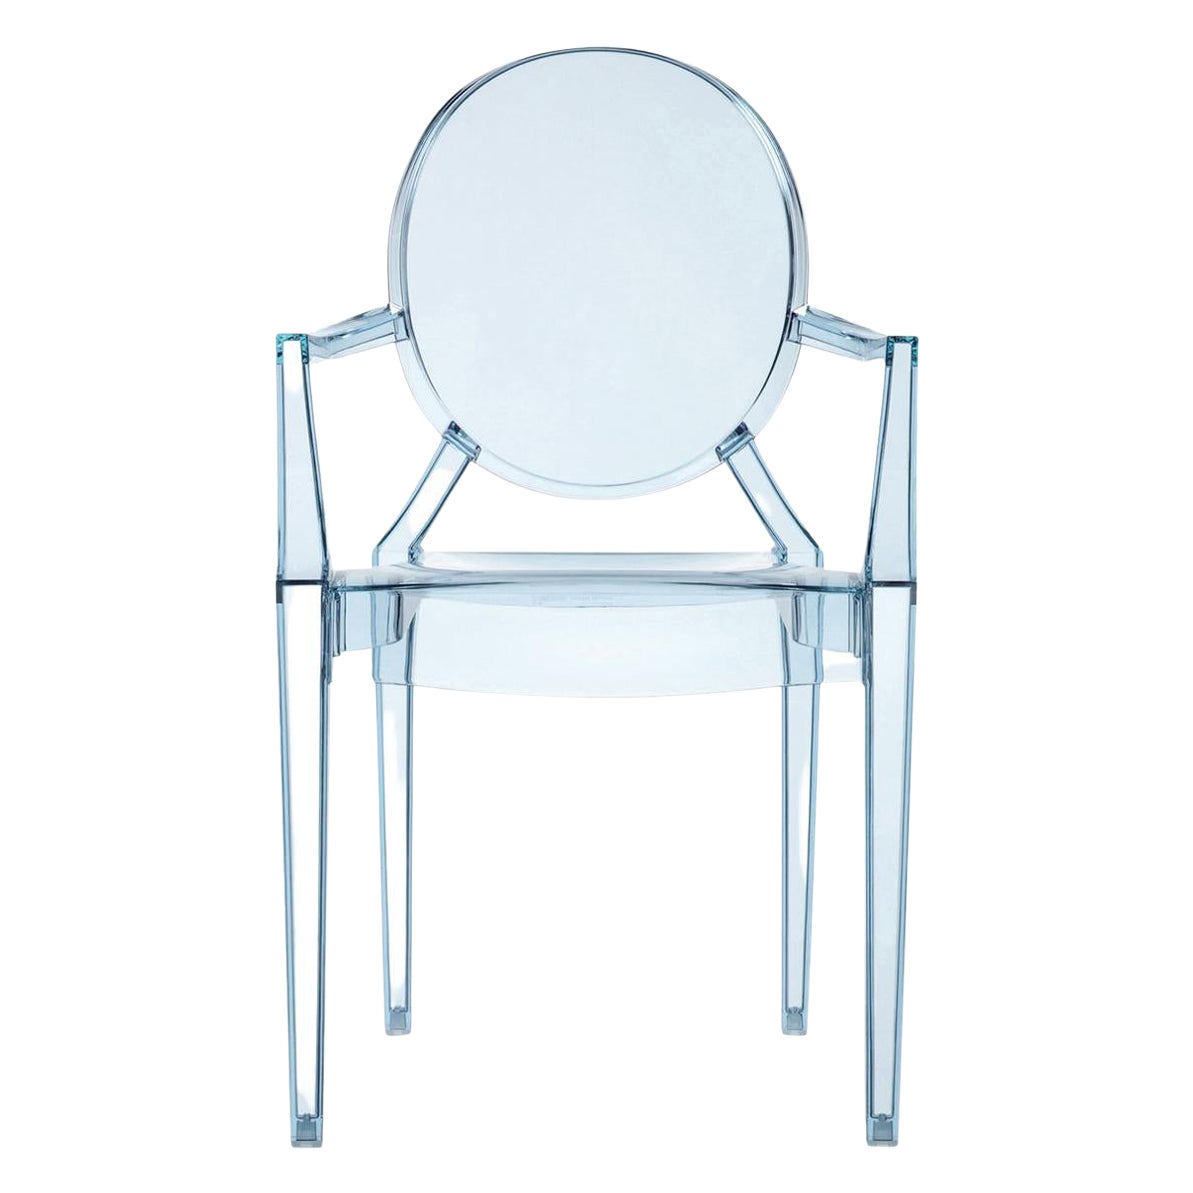 What are Kartell Ghost chairs made of?